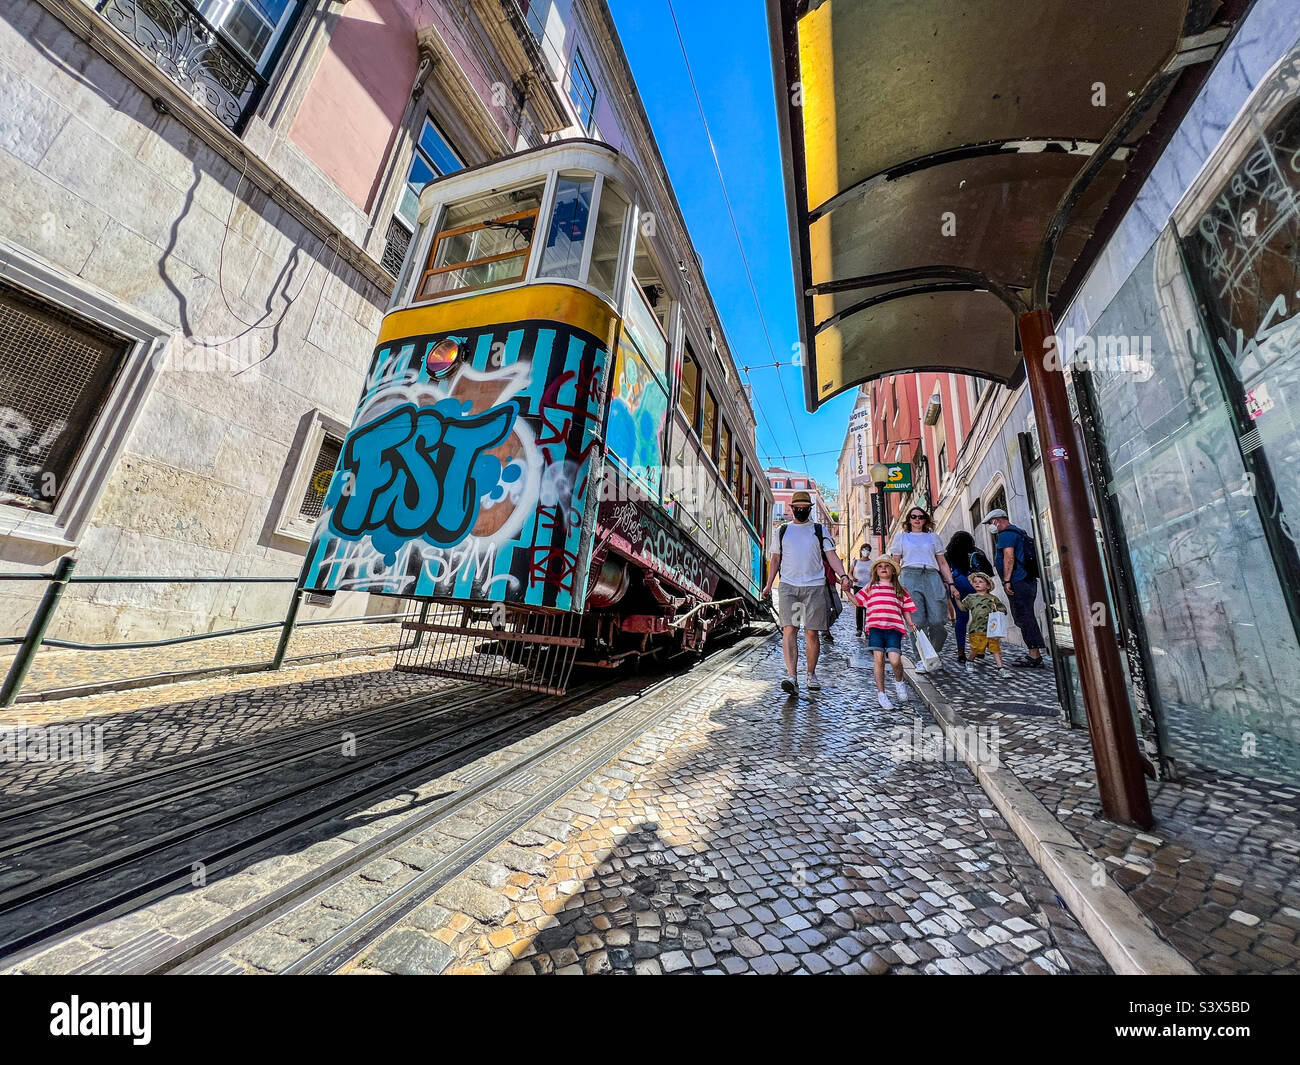 Gloria Funicular cable car a popular tourist attraction in Lisbon city centre in Portugal Stock Photo